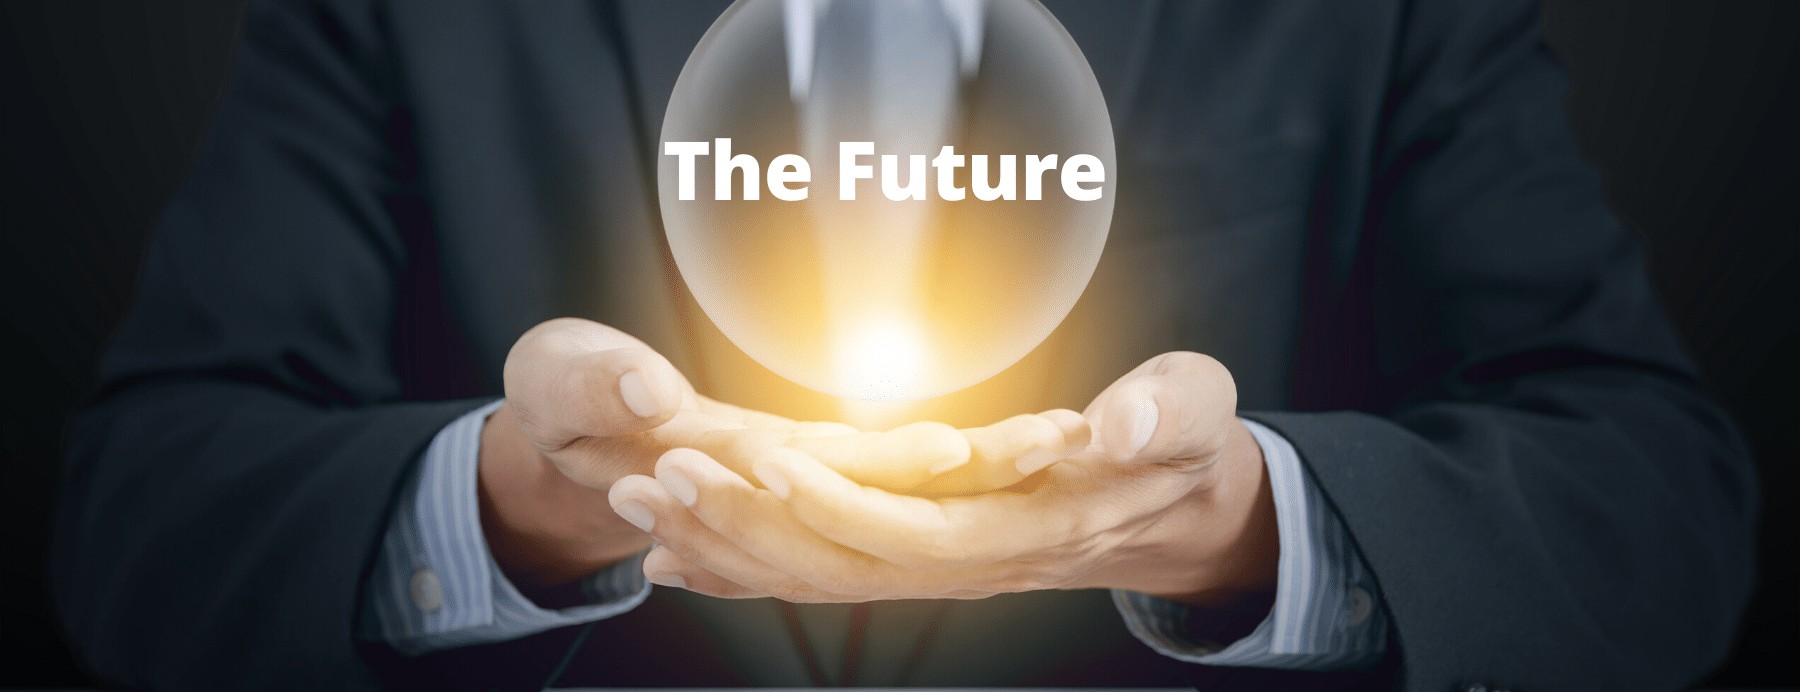 Tell the Future with a Crystal Ball